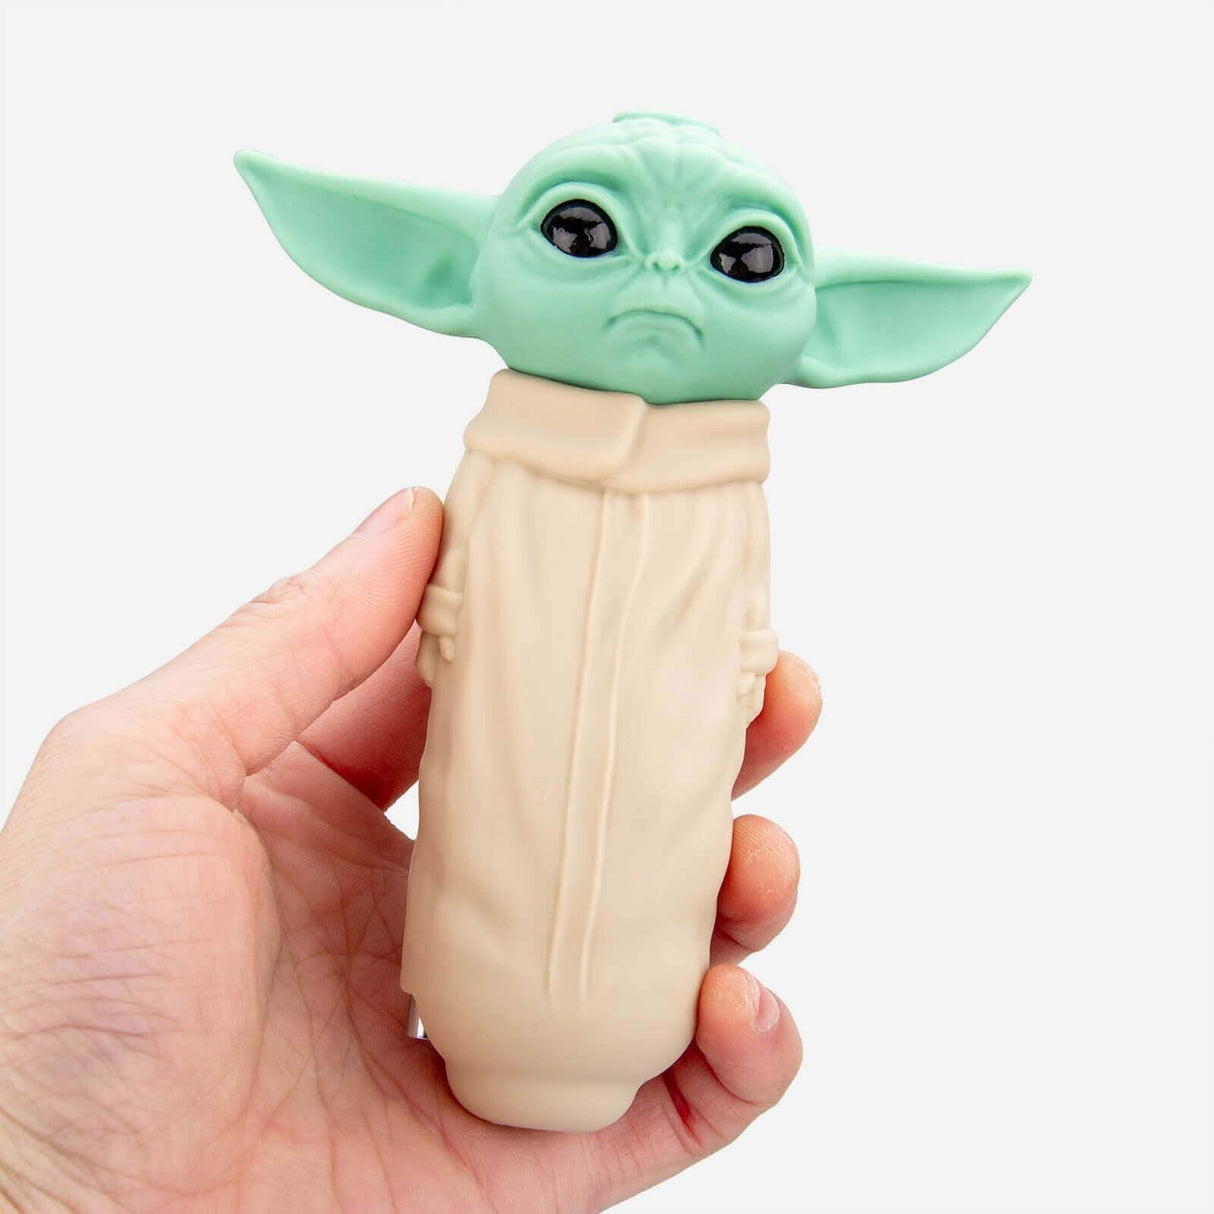 Hand holding Baby Yoda Silicone Hand Pipe by PILOT DIARY, 4.5" for Dry Herbs and Concentrates